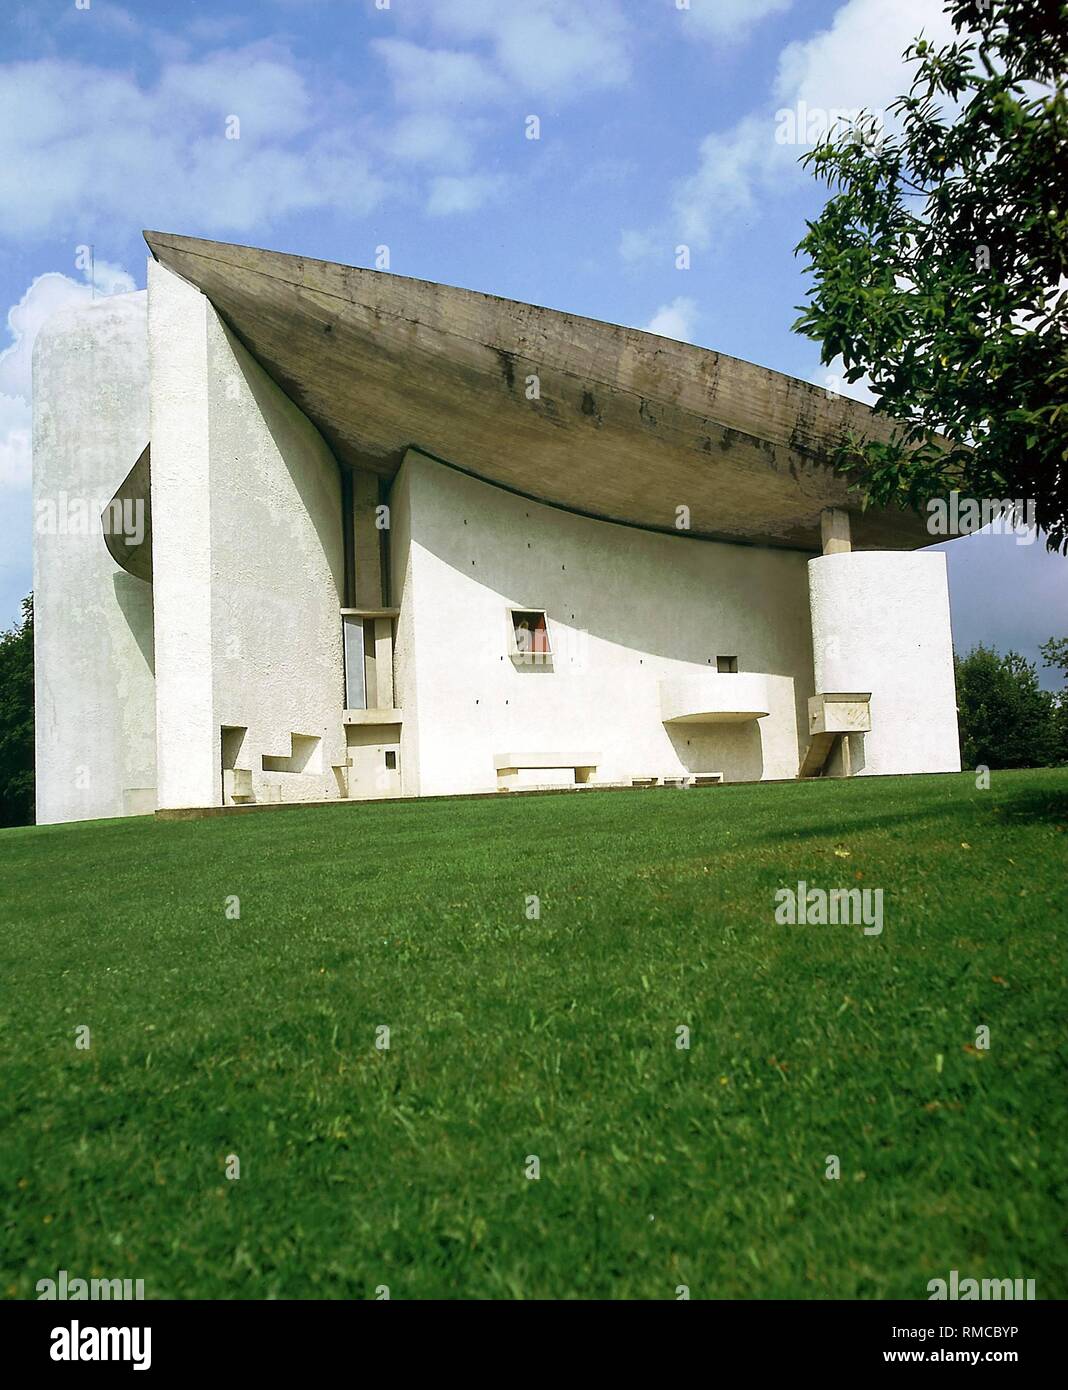 The pilgrimage church "Notre-Dame-du-Haut" by Le Corbusier in Ronchamp in France. Stock Photo